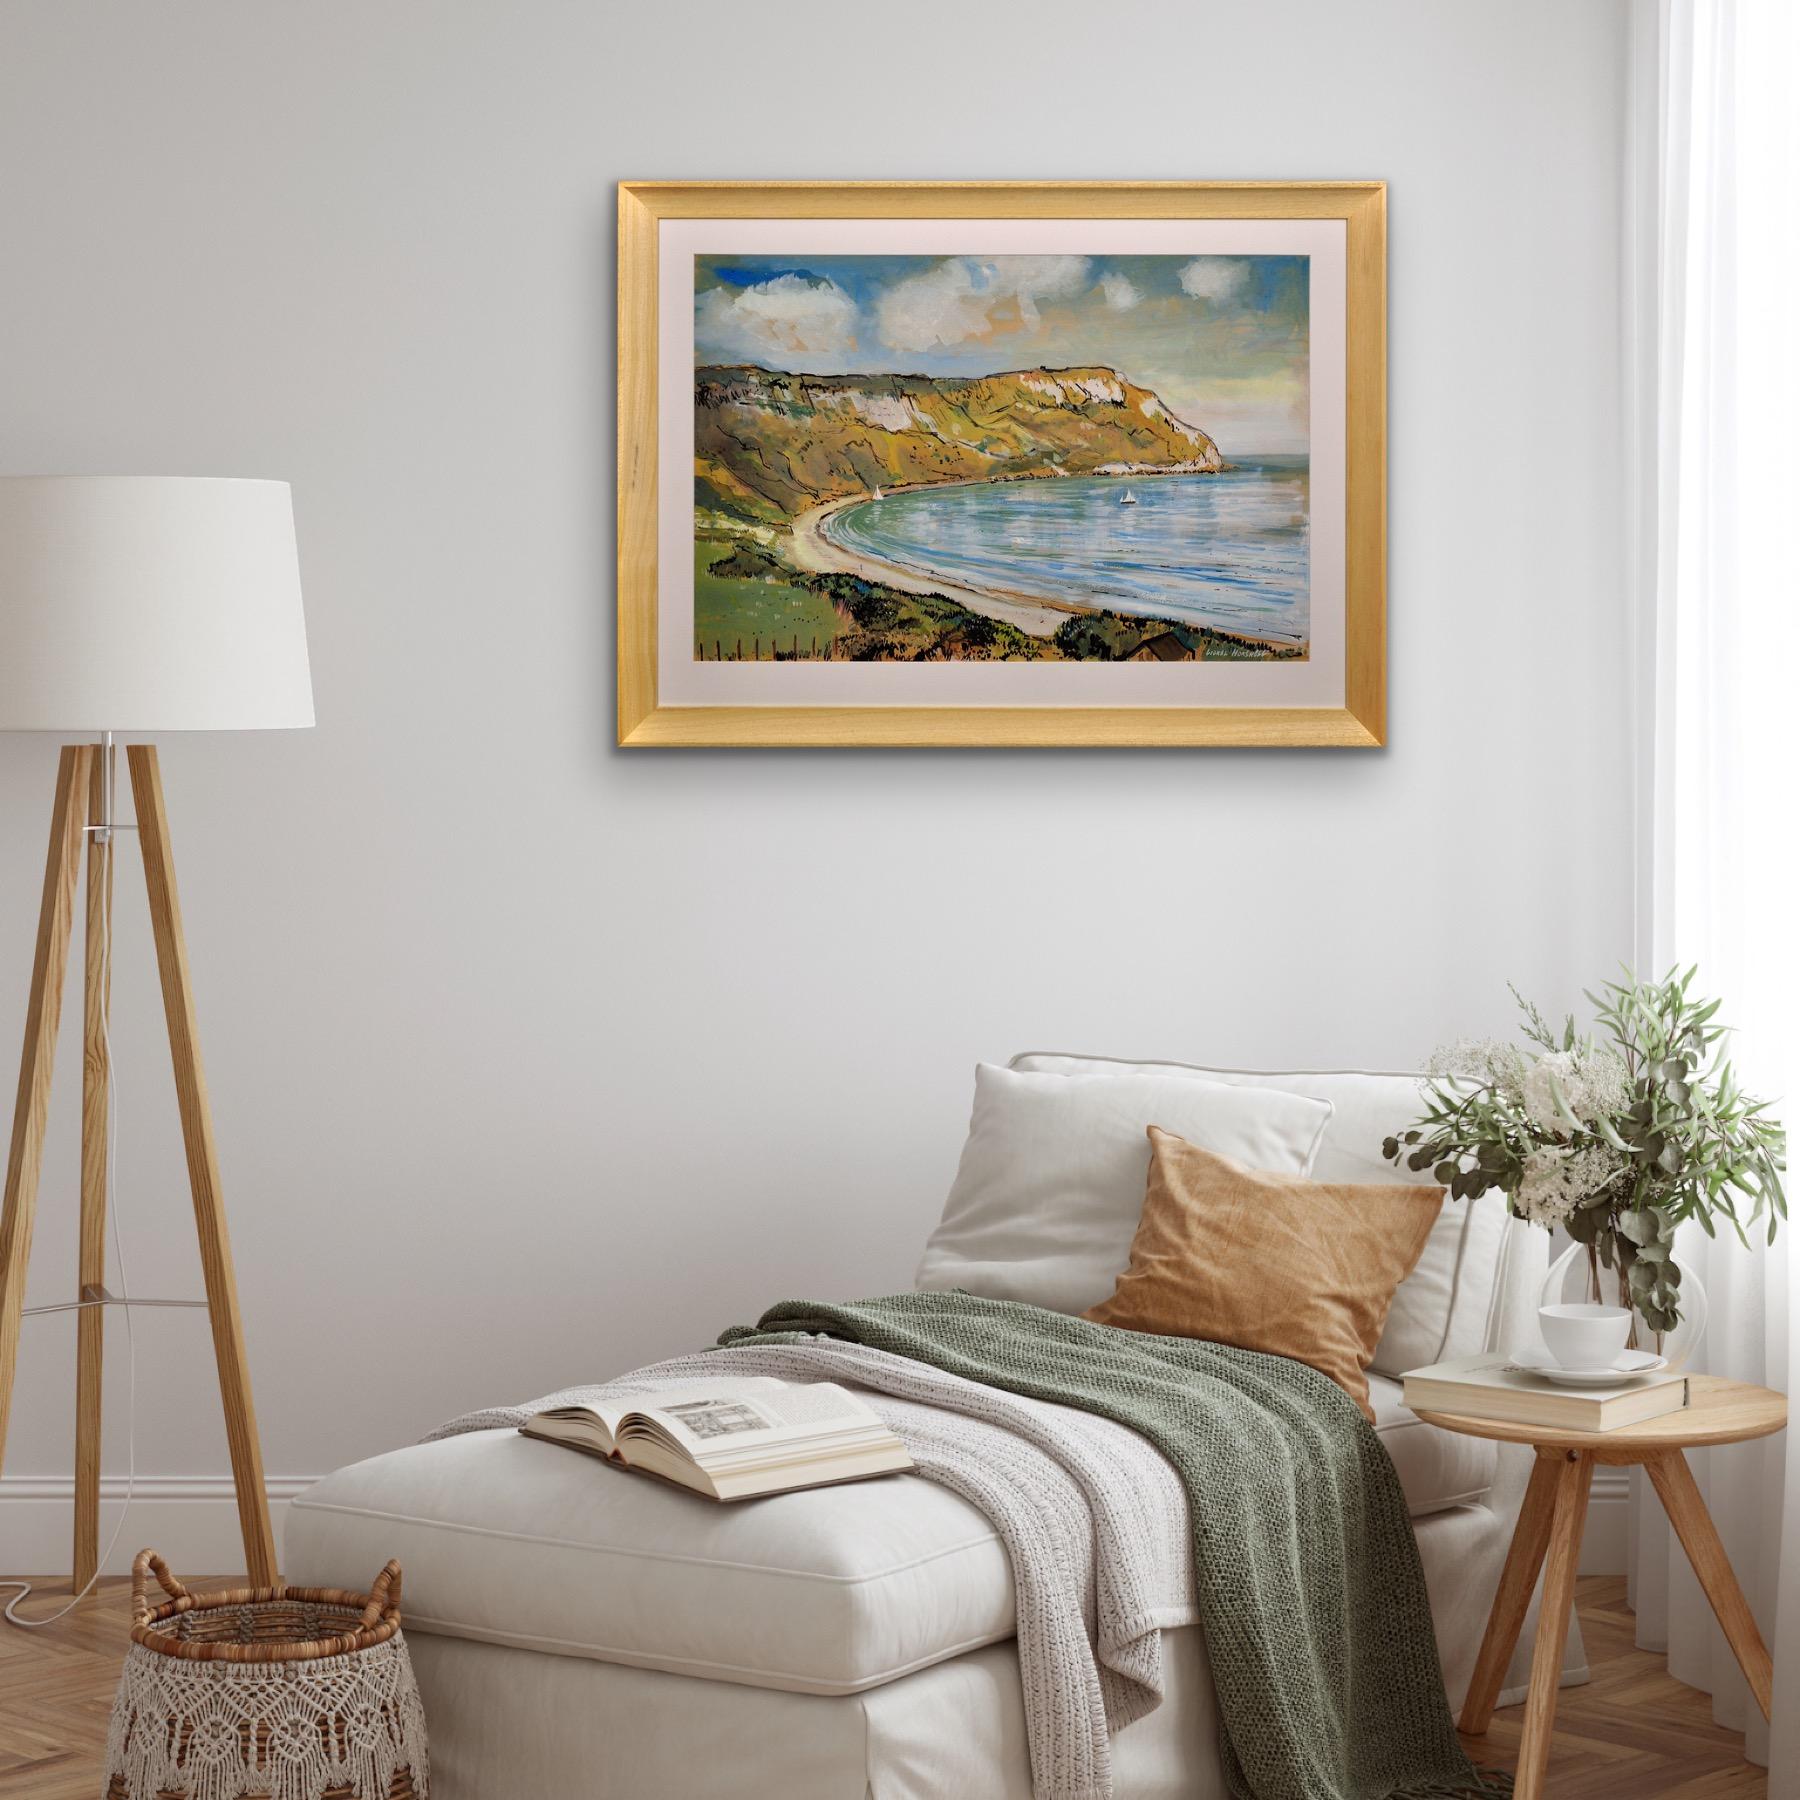 Ringstead Bay and White Nothe. Dorset. Weymouth and Portland. Jurassic Coast. For Sale 12